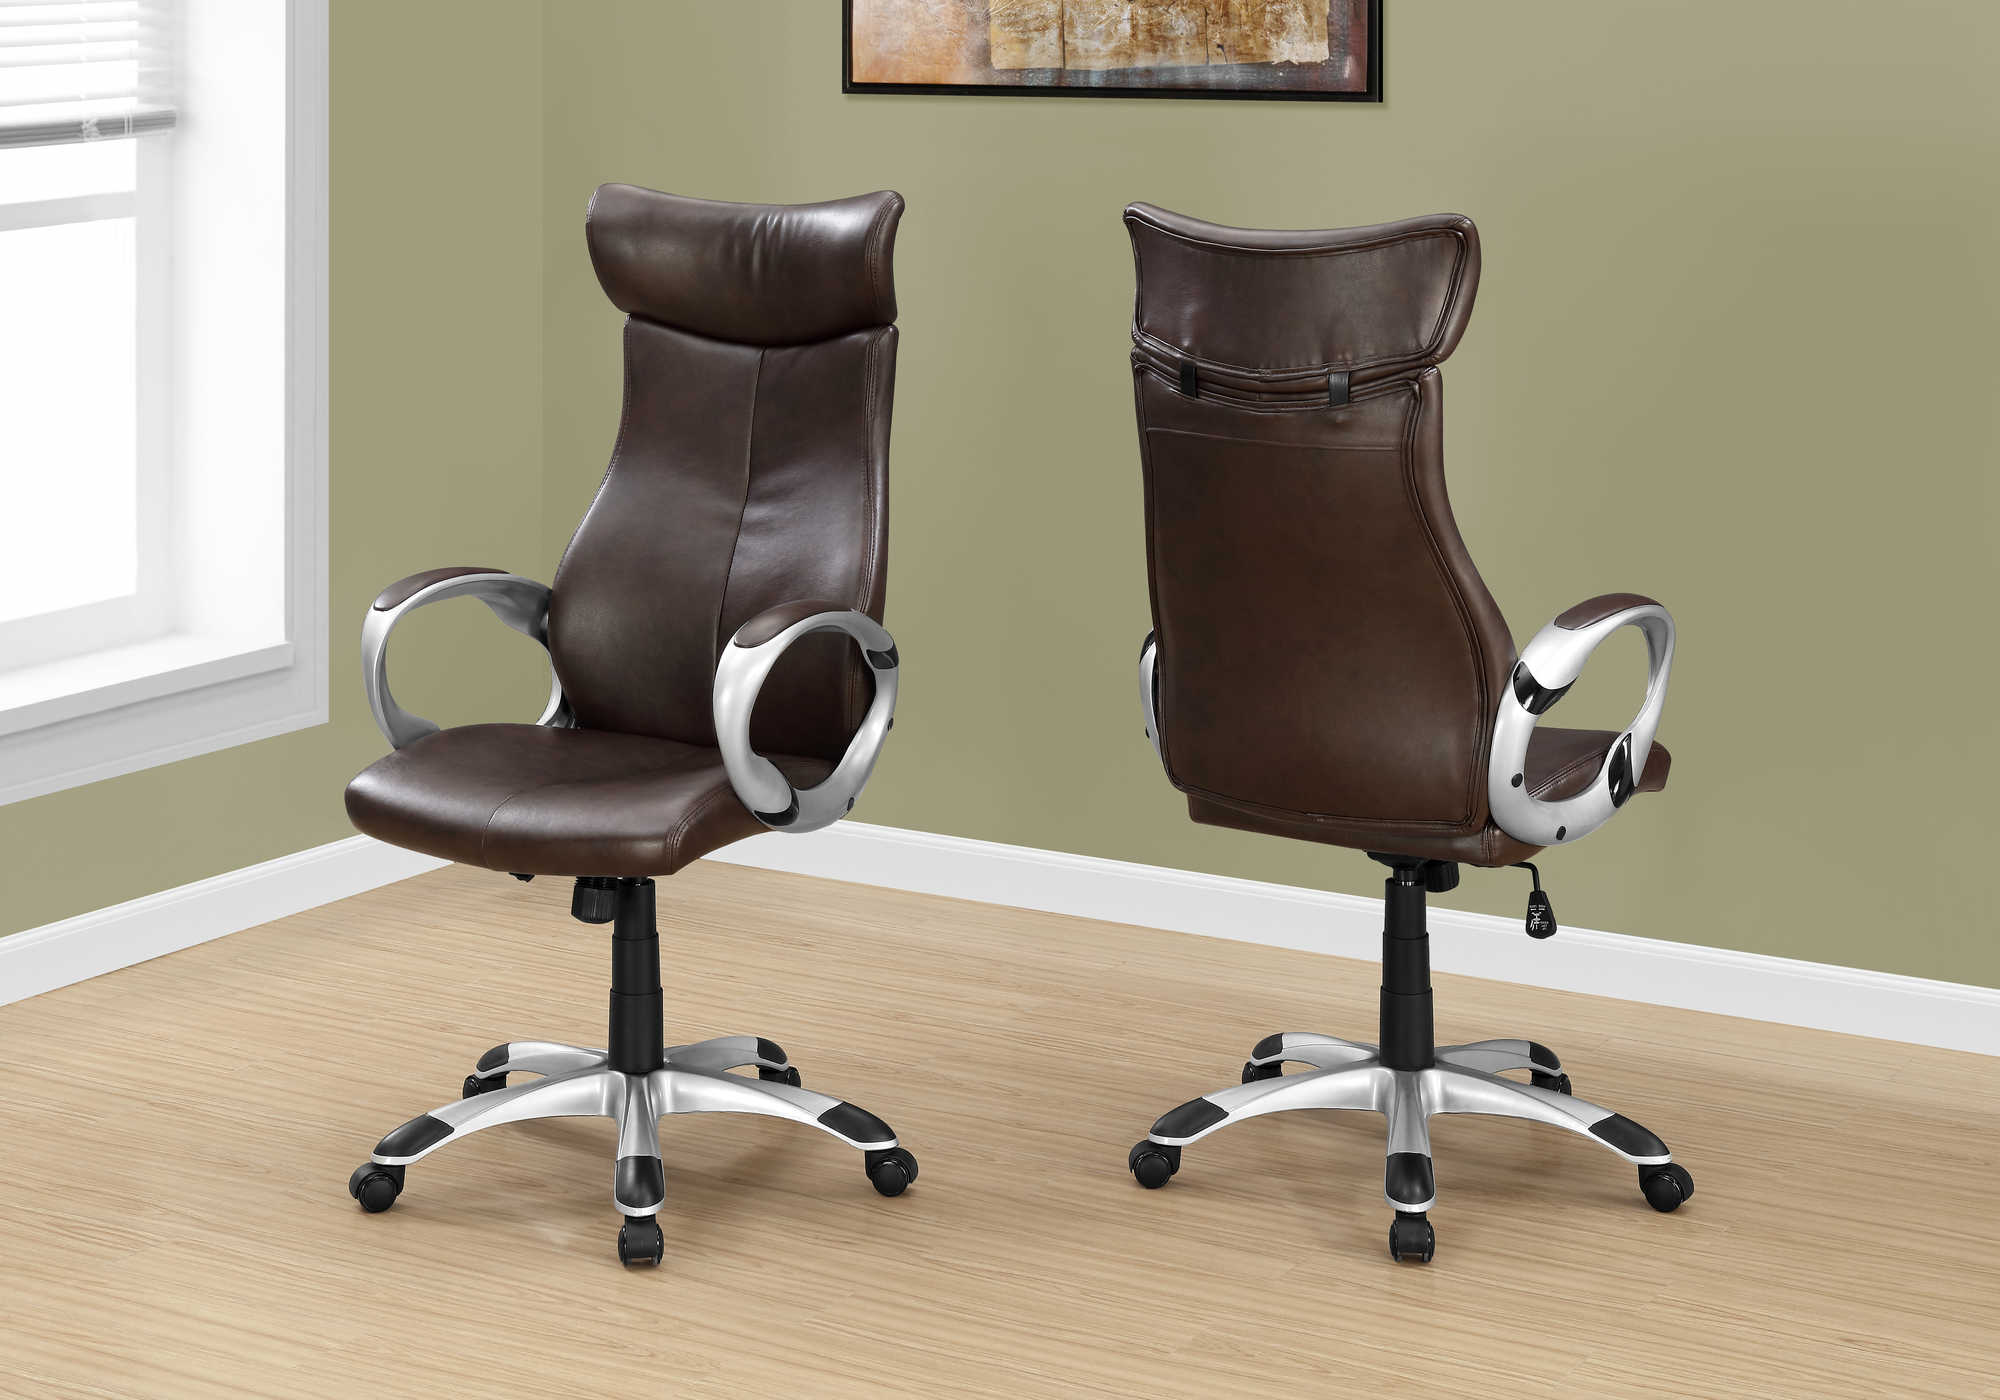 OFFICE CHAIR - BROWN LEATHER-LOOK / HIGH BACK EXECUTIVE